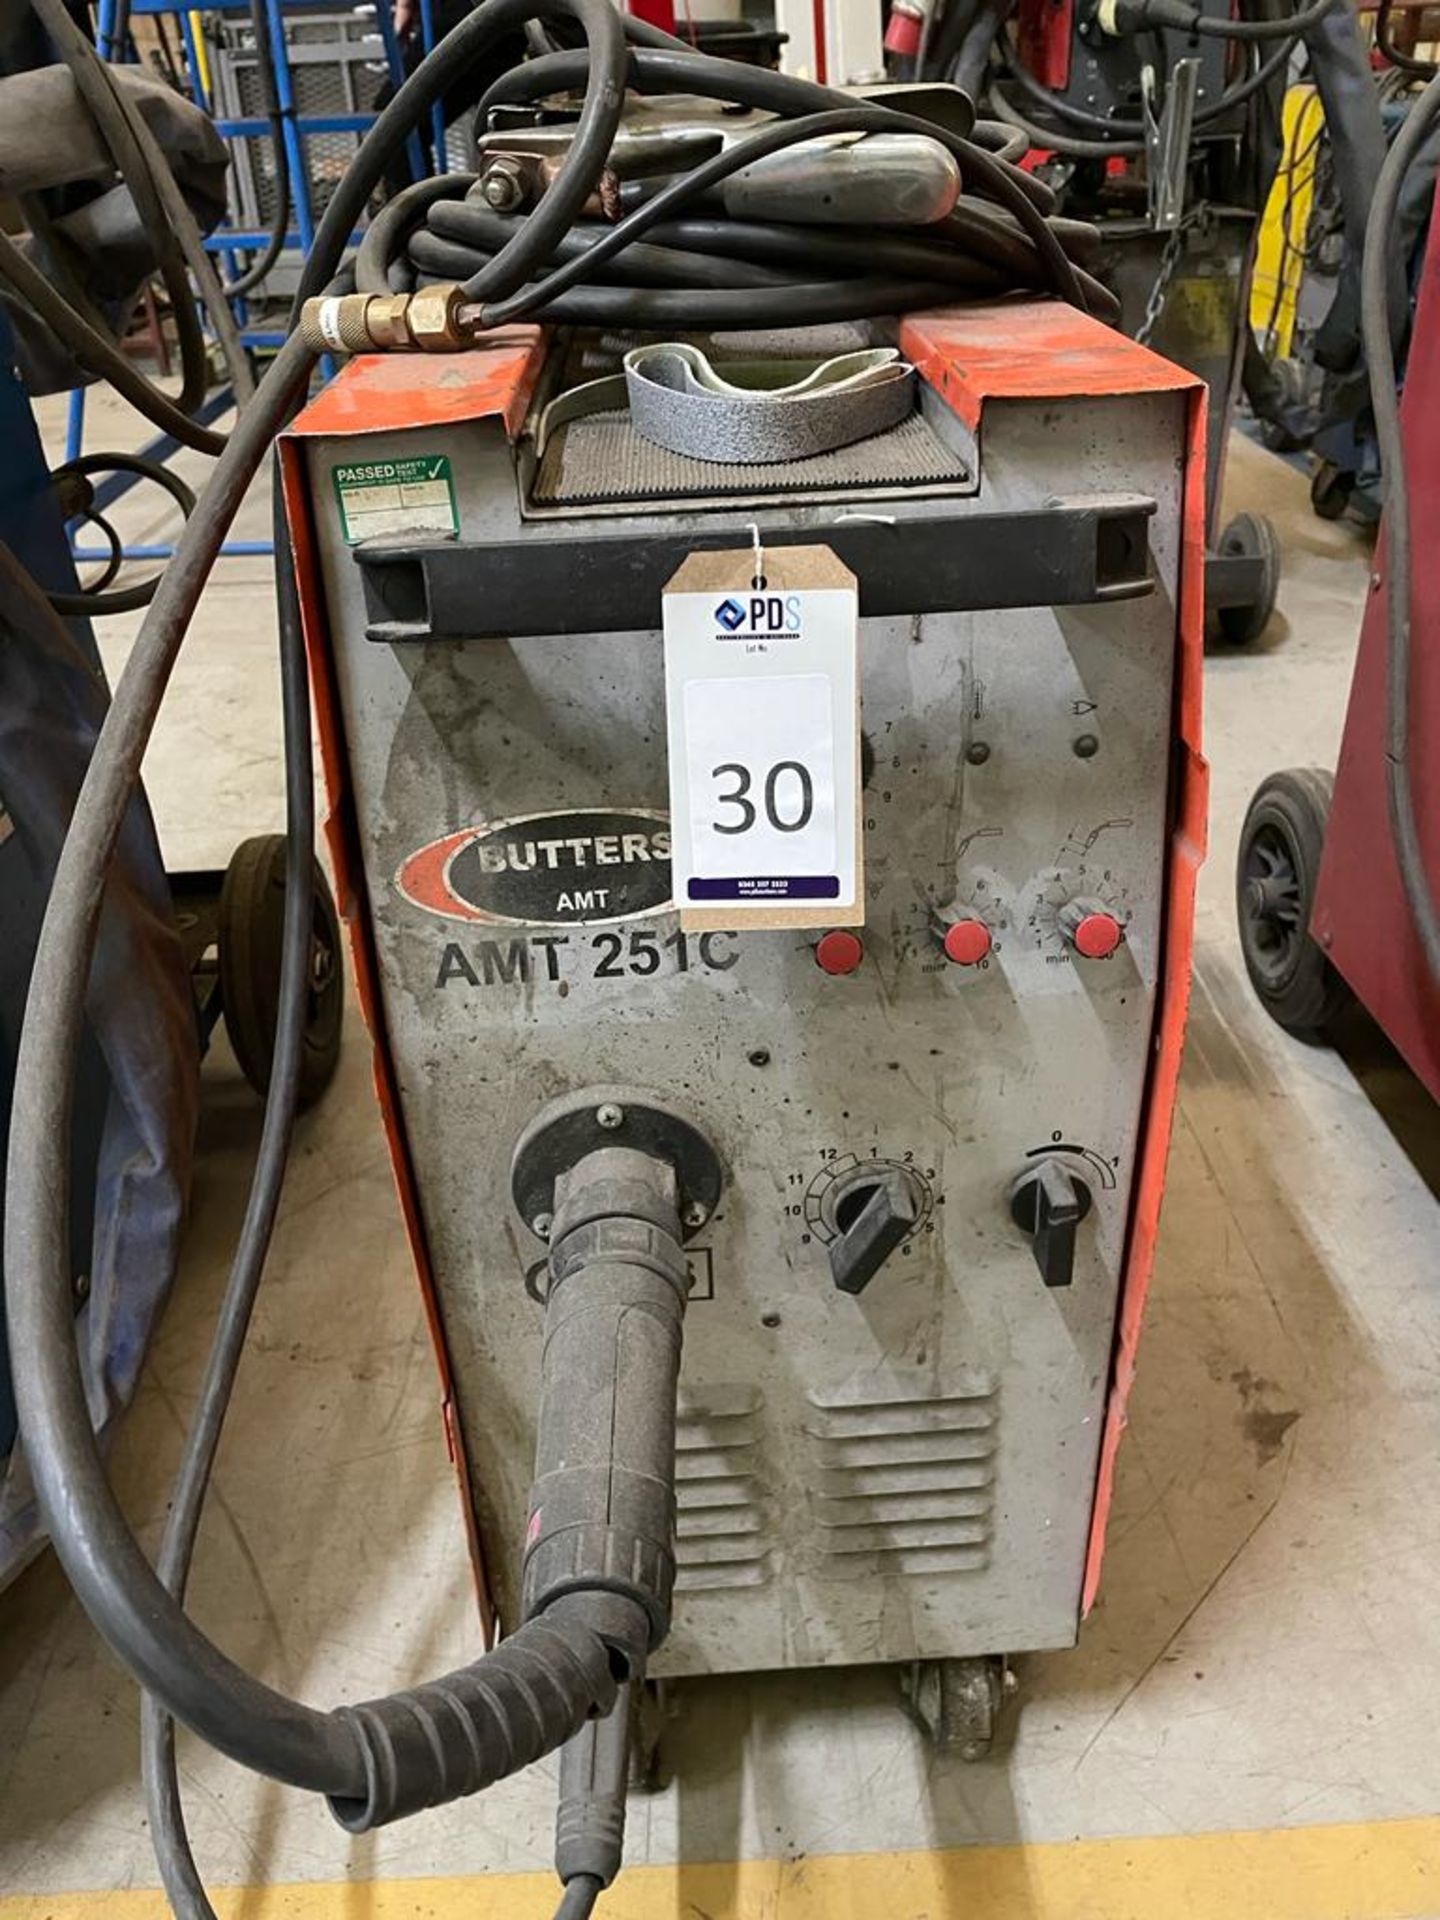 Butters AMT 251C Mig Welder (Location Dover. Please Refer to General Notes)